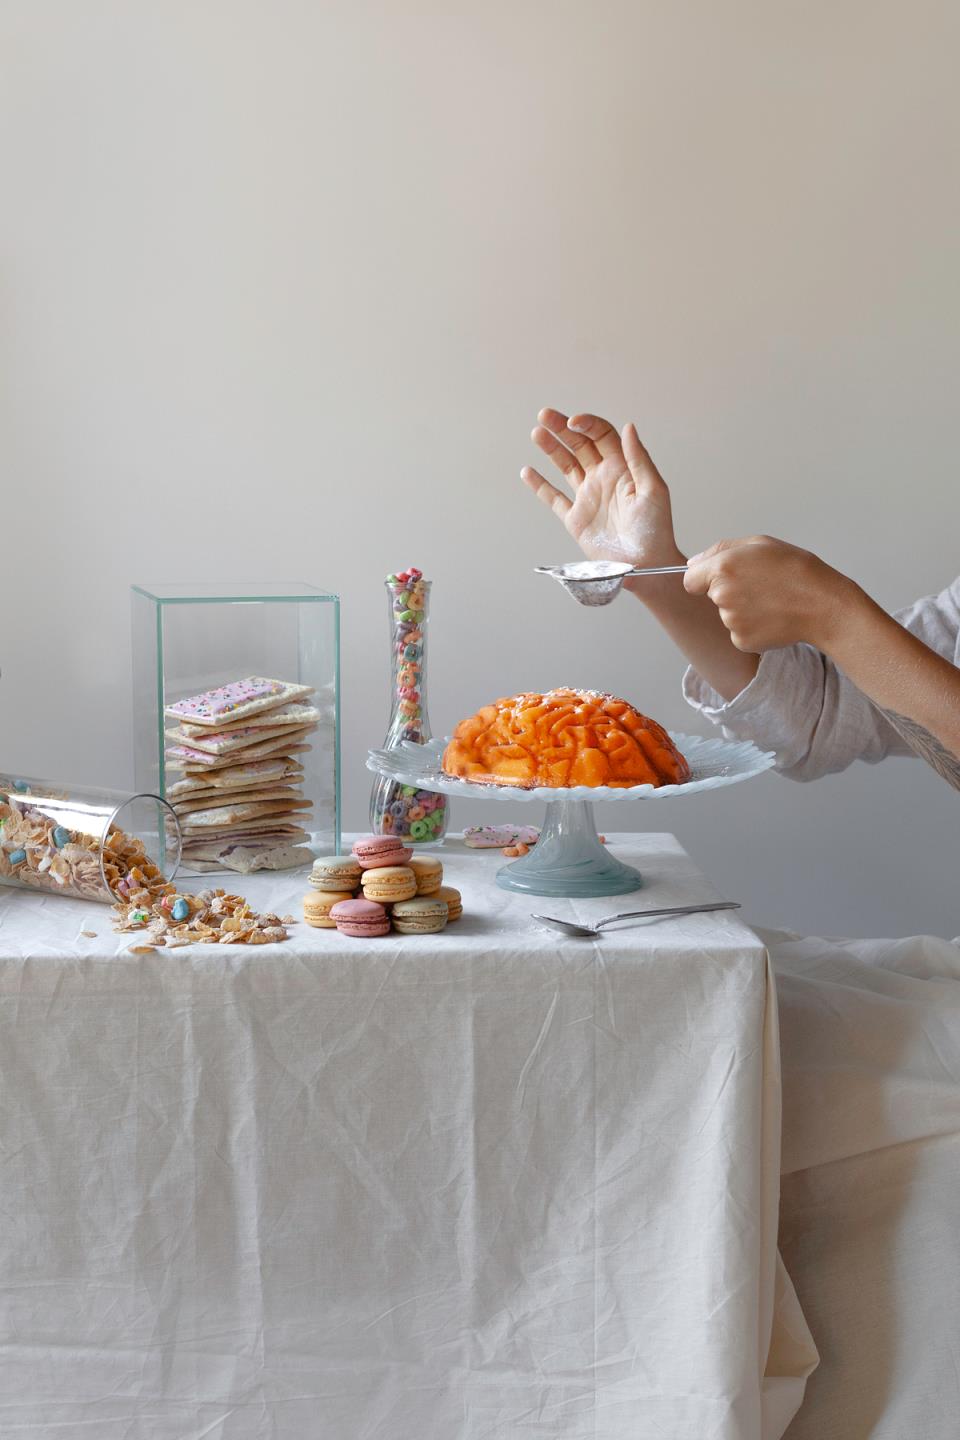 A jello mold in the shape of a brain sits on a platter, surrounded by sweets, while a person in the background holds a spoo<em></em>nful of sugar above the mold.